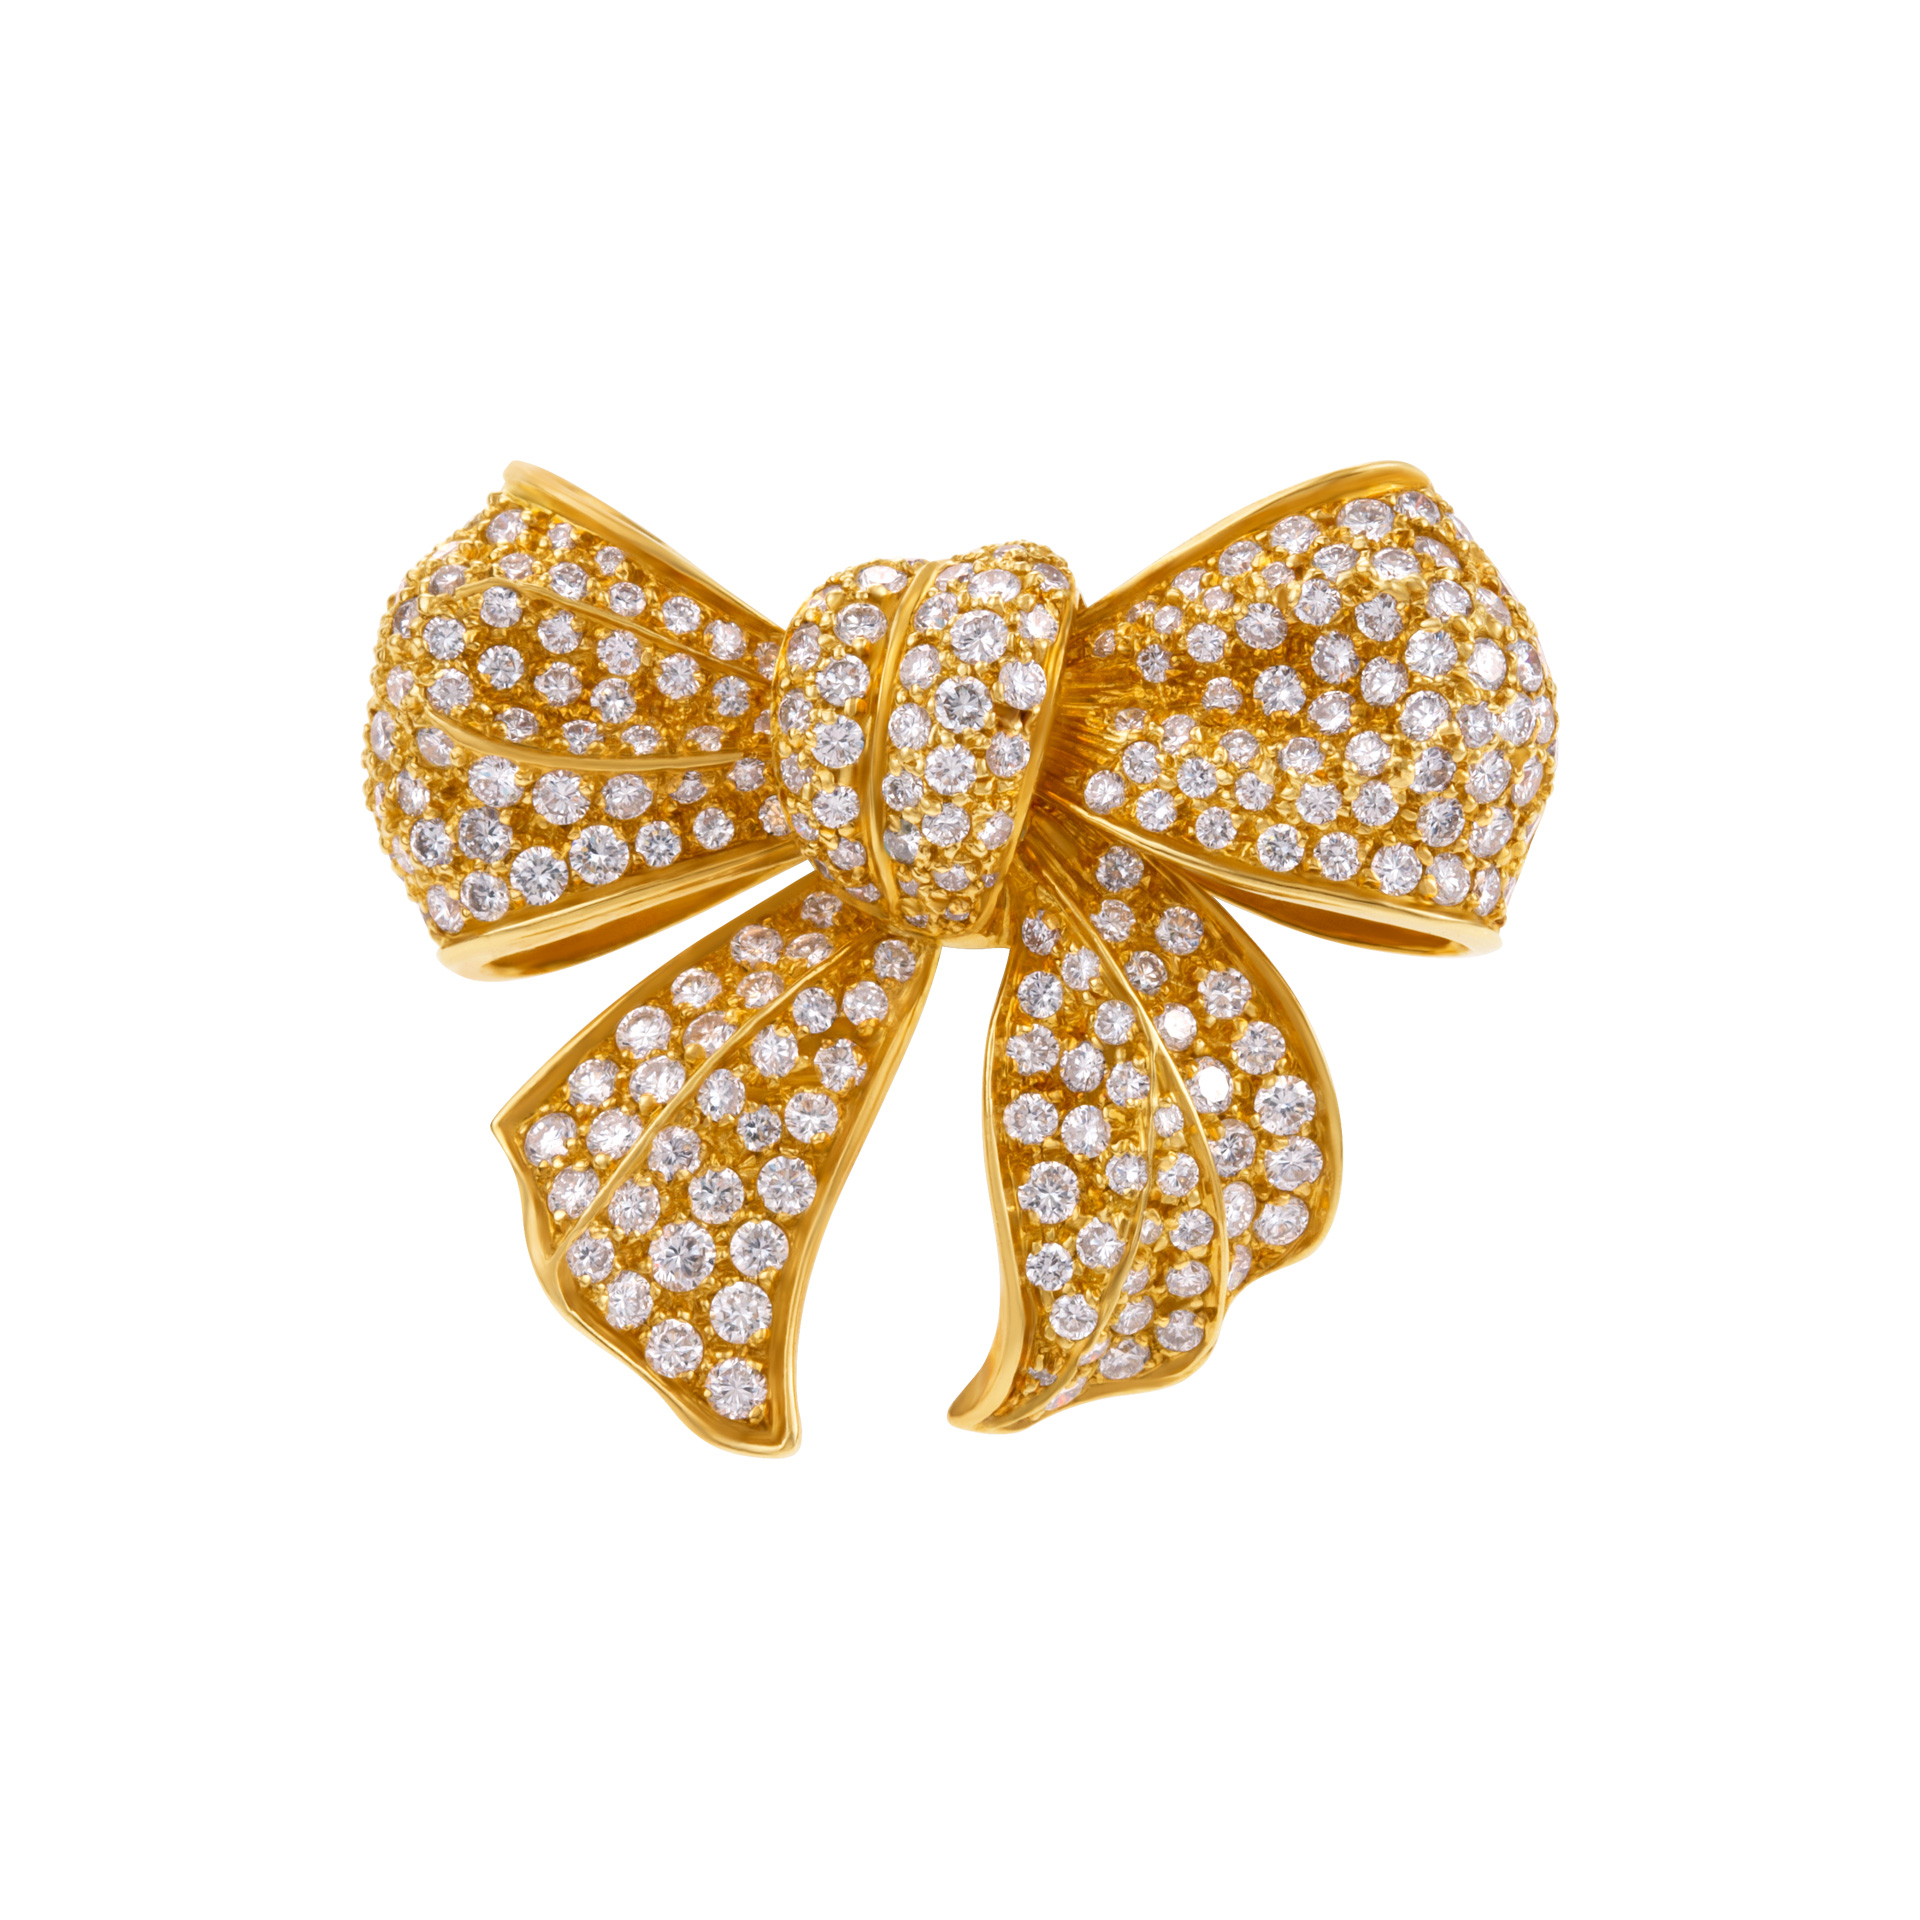 Chanel diamond bow broach in 18K gold image 1